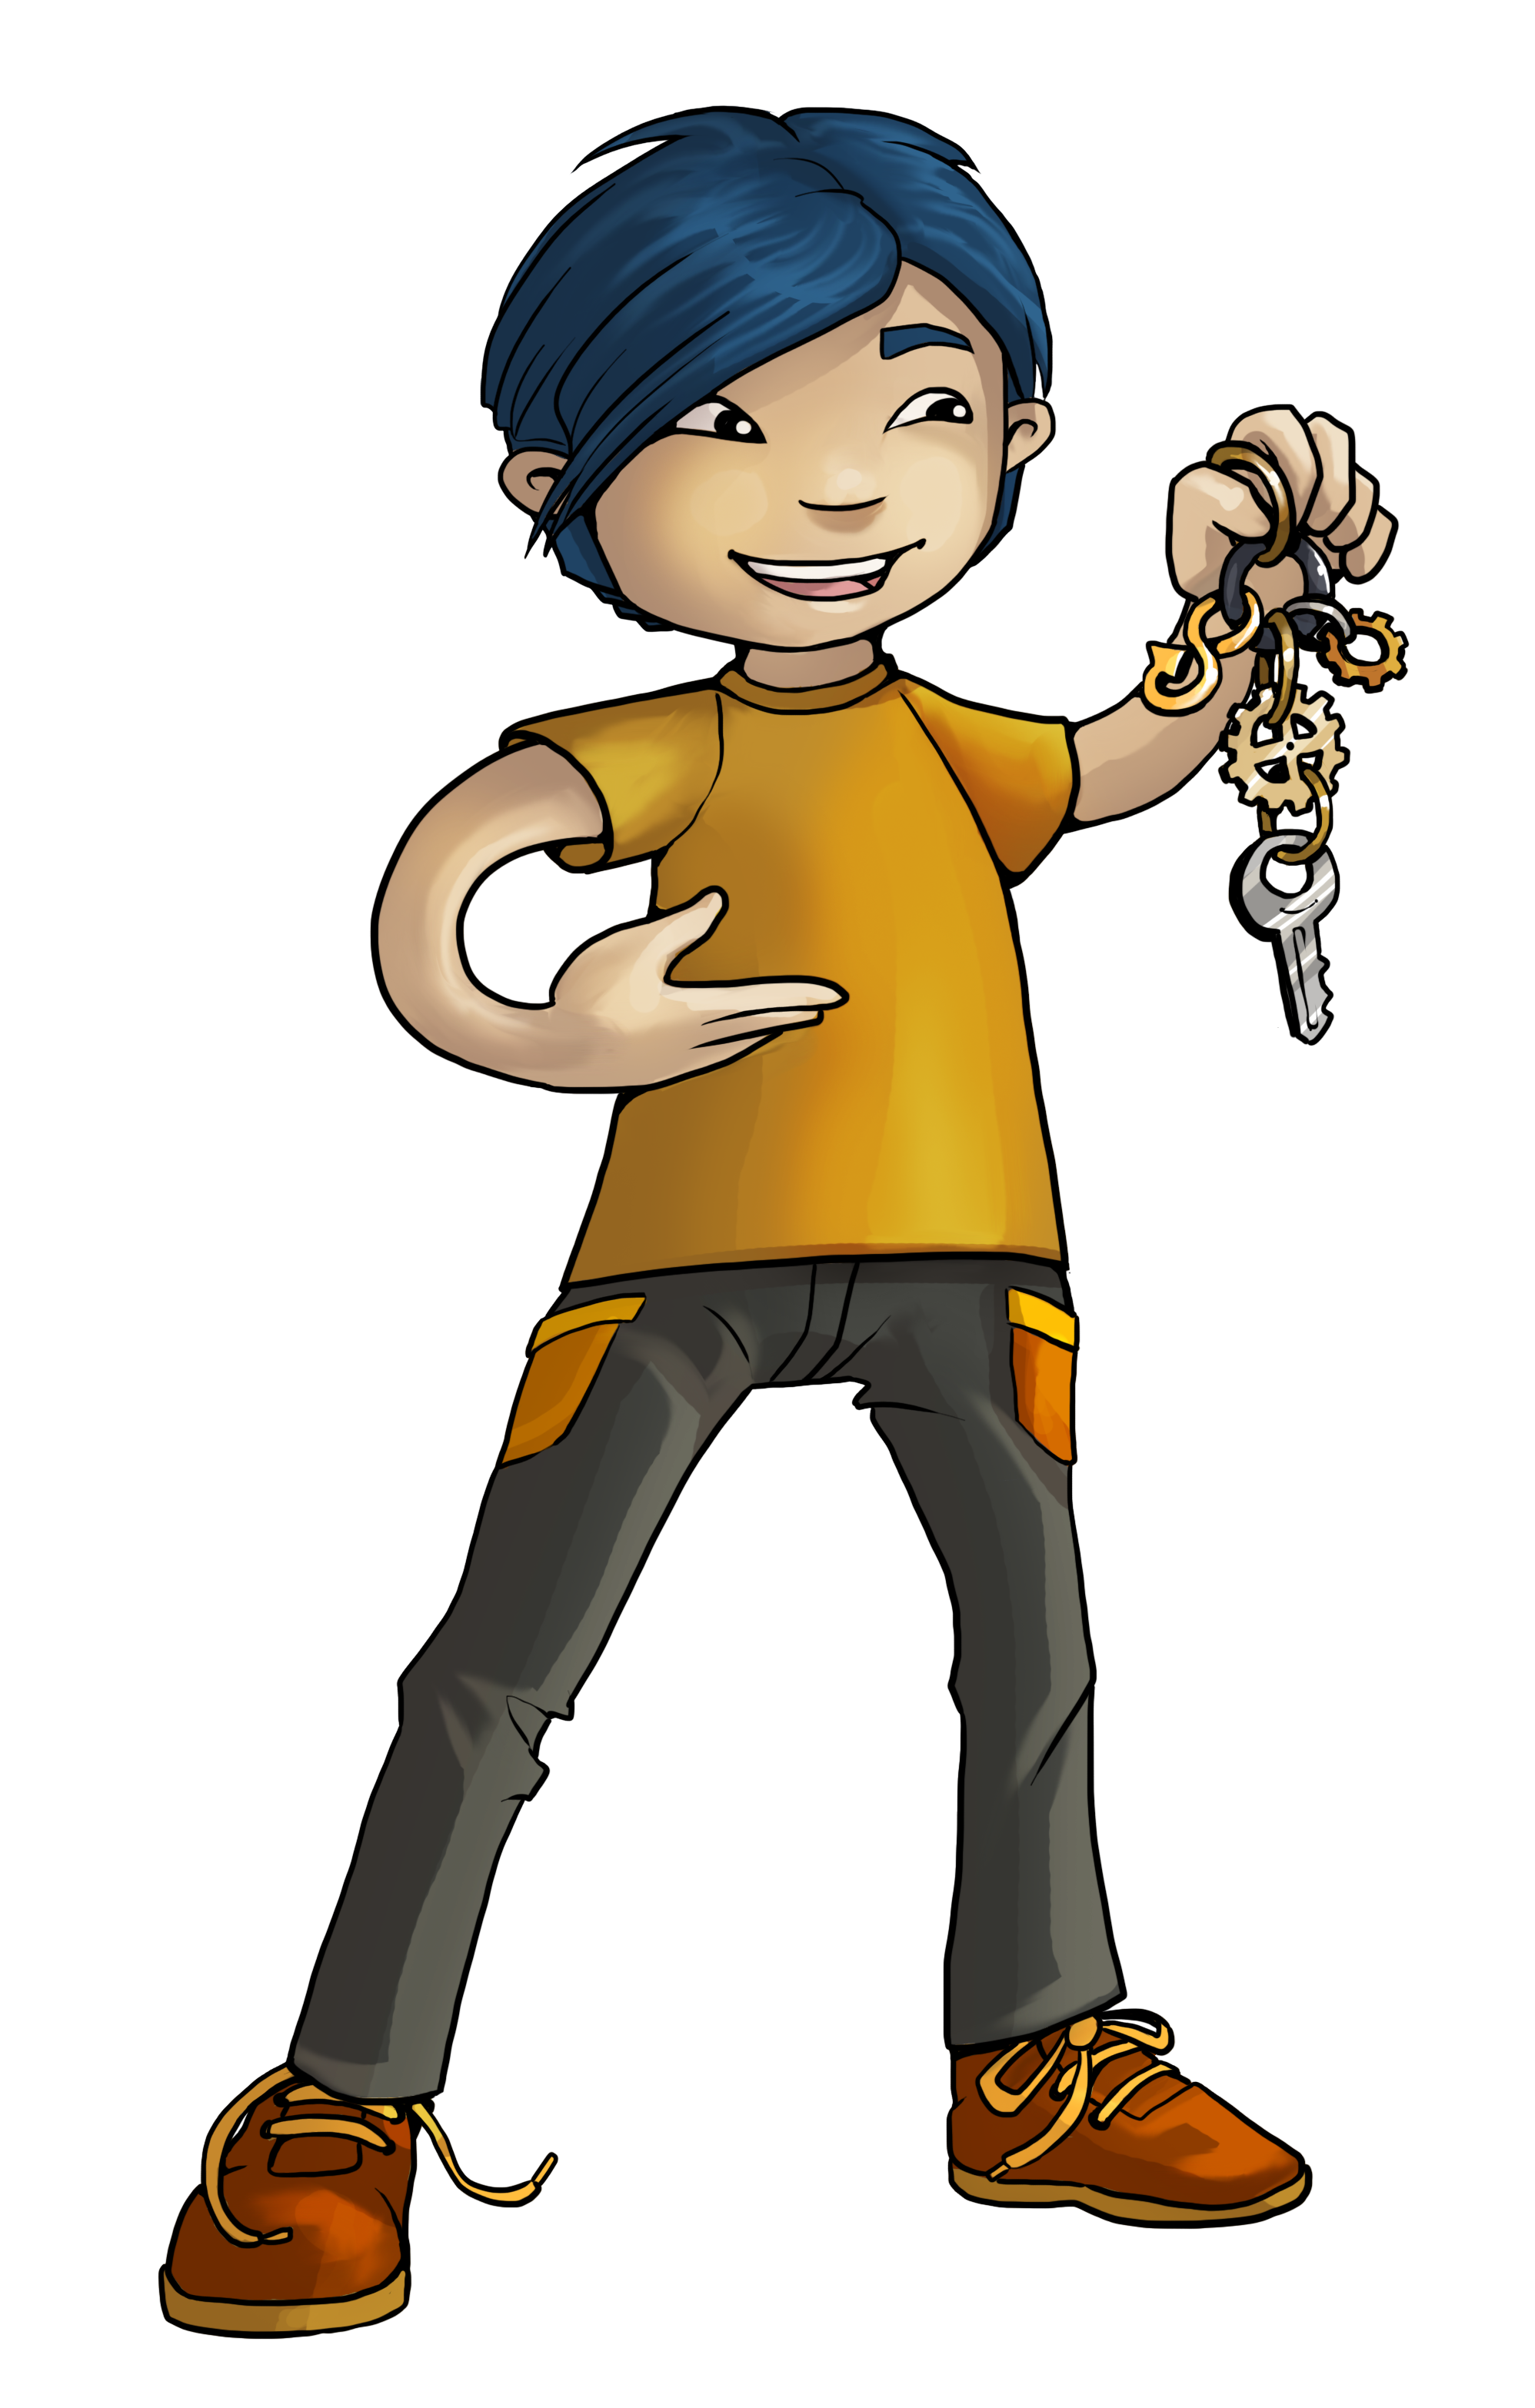 Illustration. A child is holding a keychain.